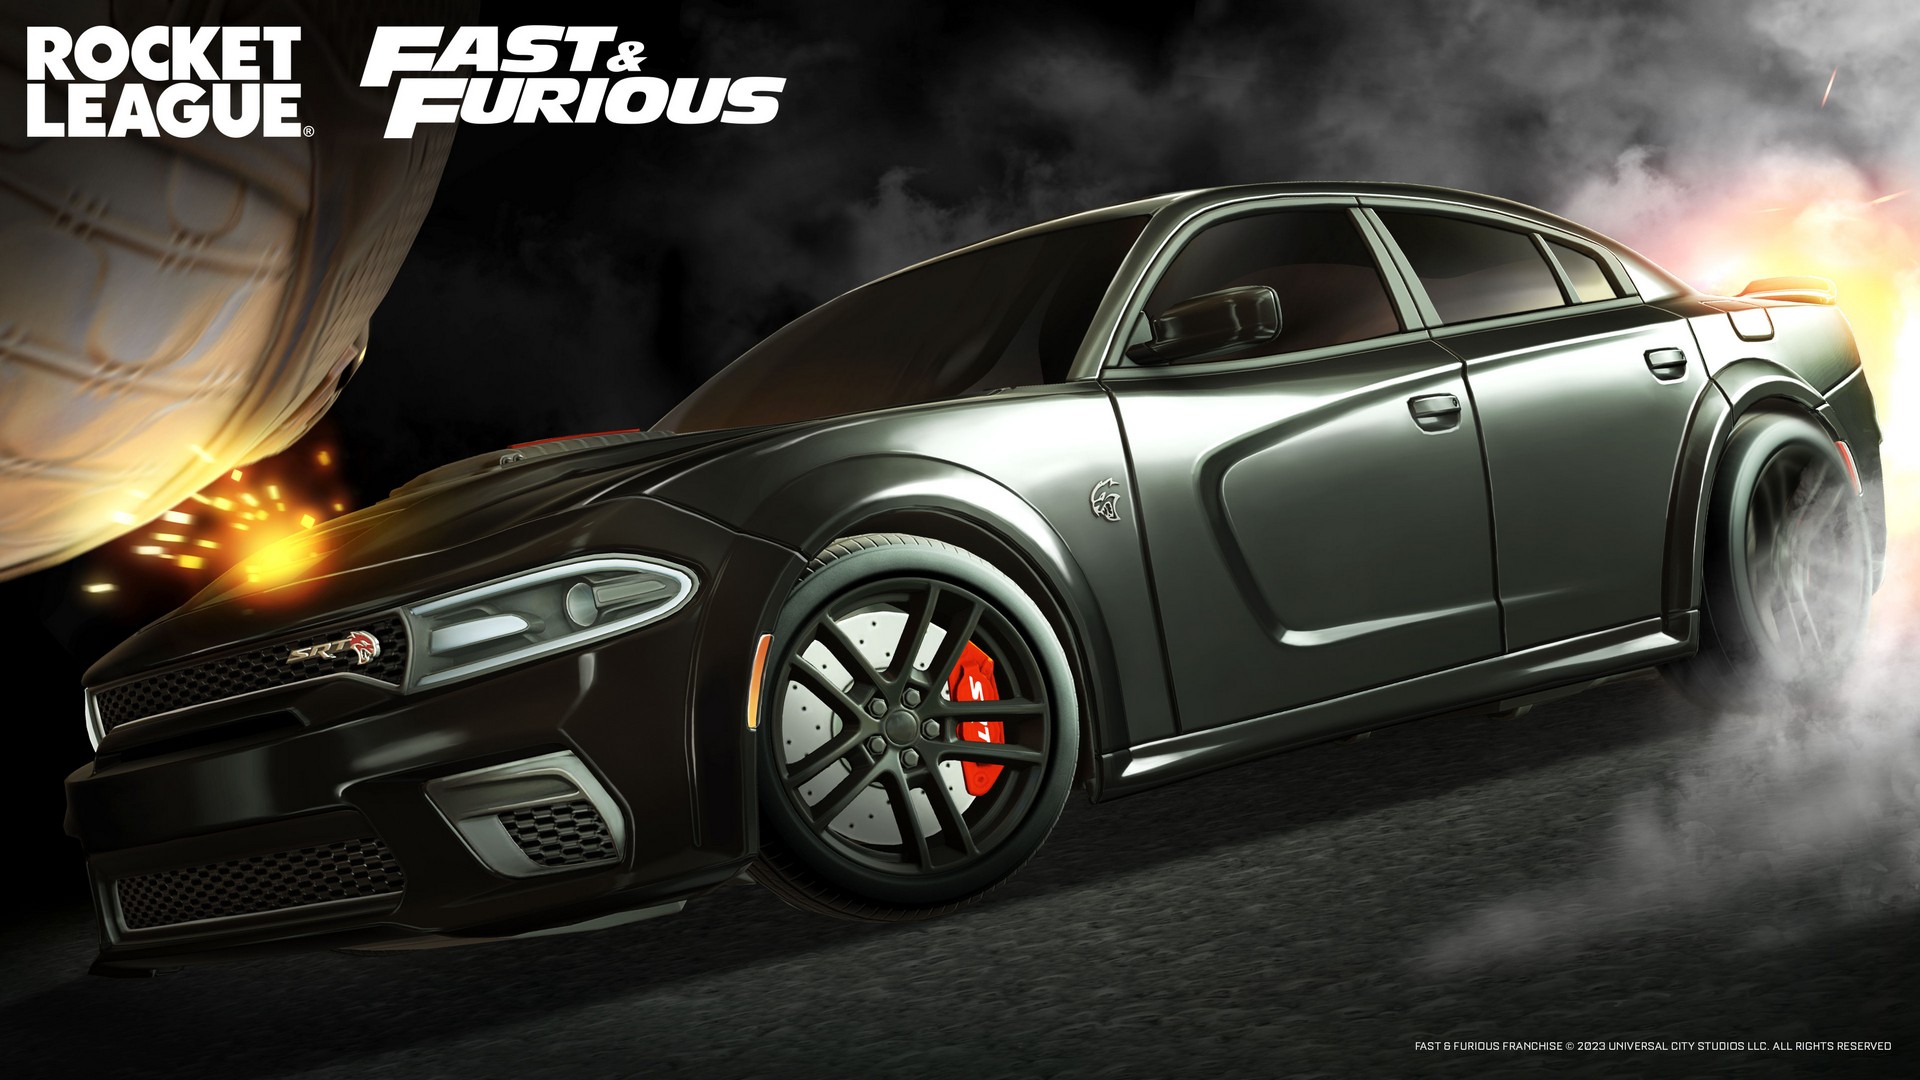 Fast & Furious Returns To Rocket League Today With The Dodge Charger SRT Hellcat